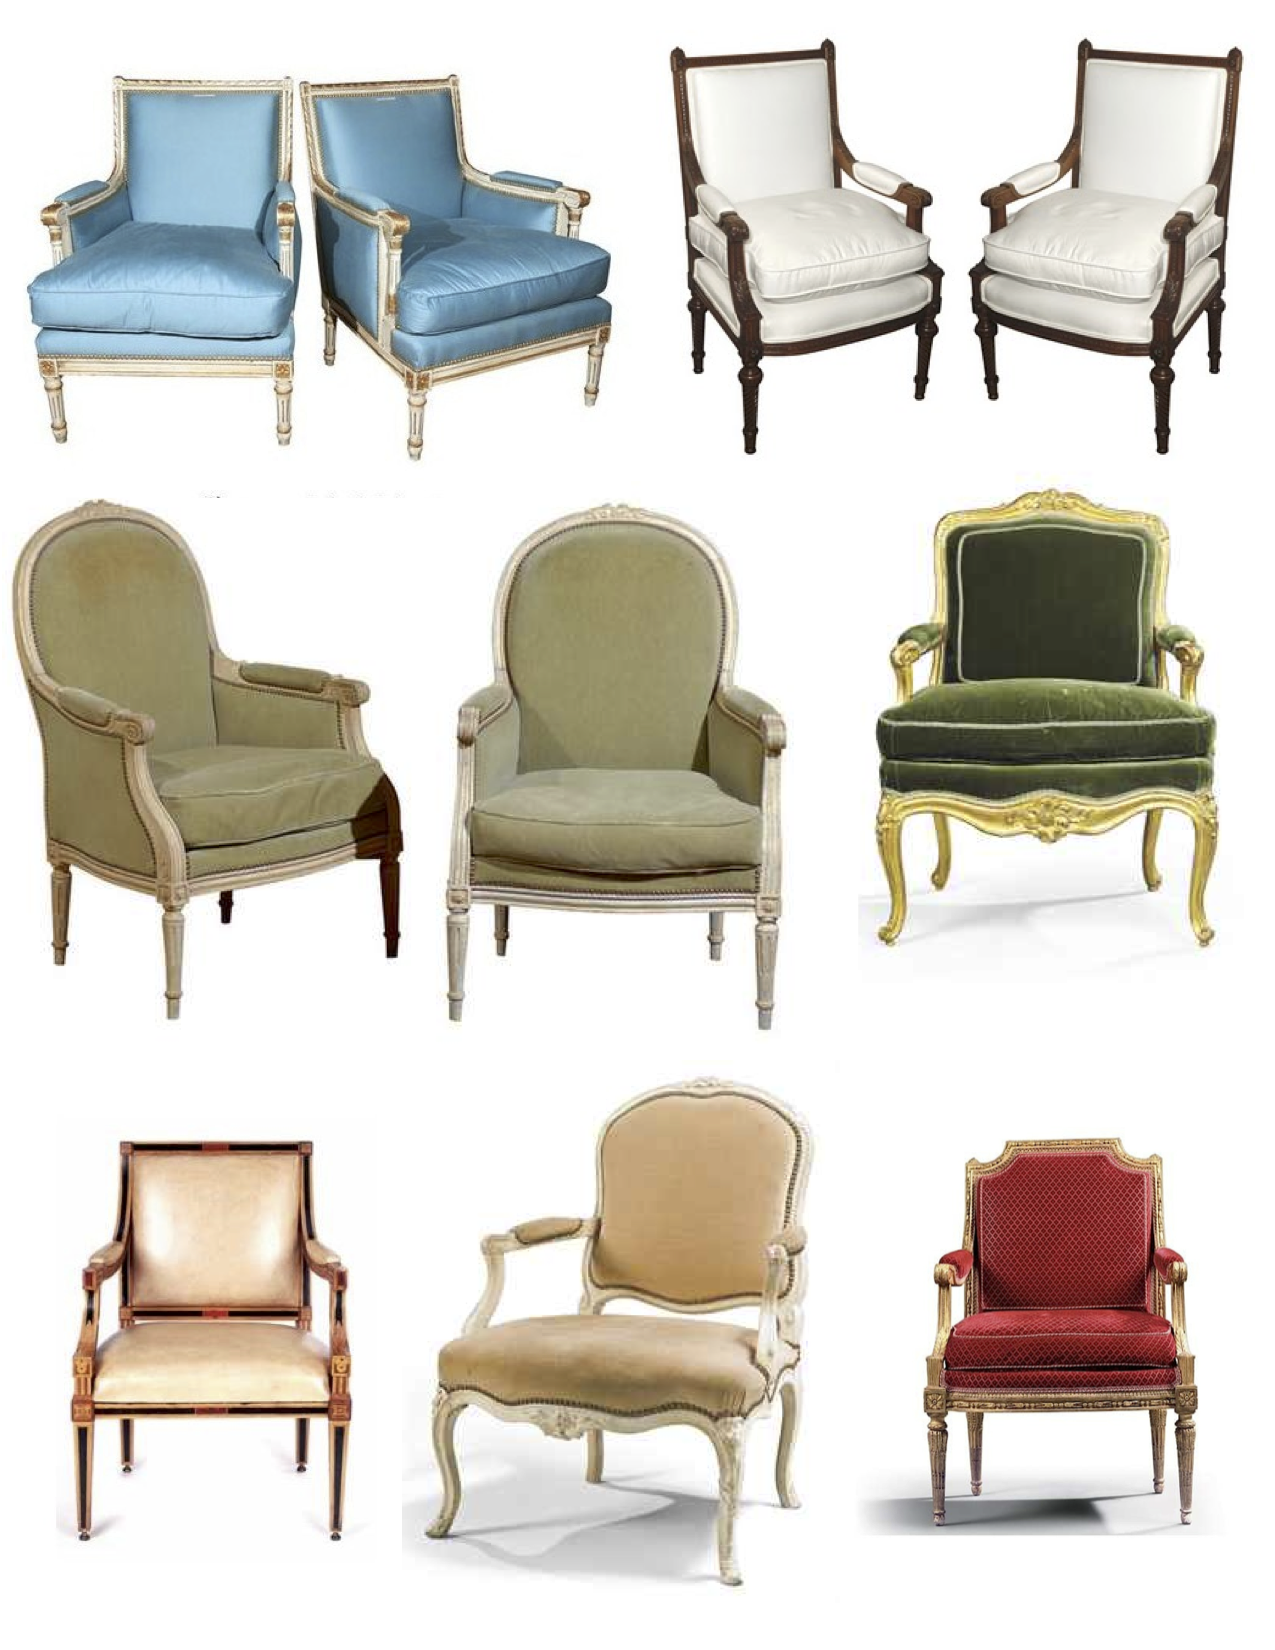 3 Louis Chair Styles & How to Spot the Differences